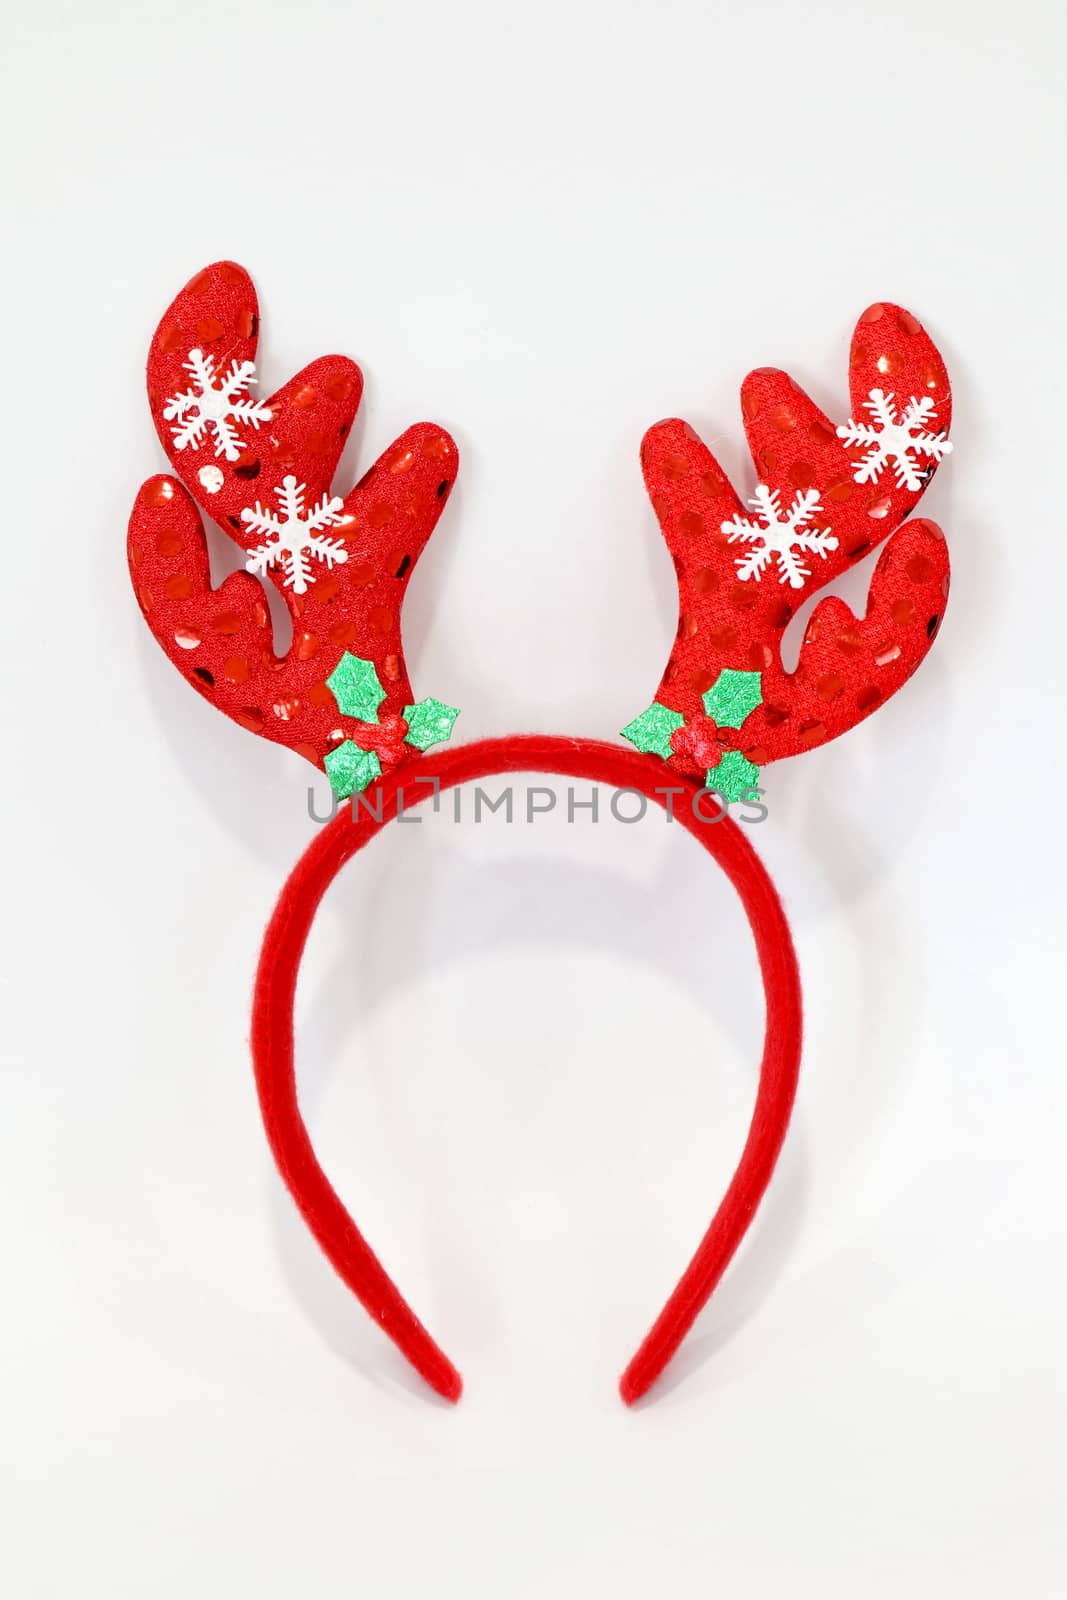 Headband Christmas, Reindeer antlers Red doll headband-hairbrush hat for festival of Christmas and new year isolated on a white background by cgdeaw